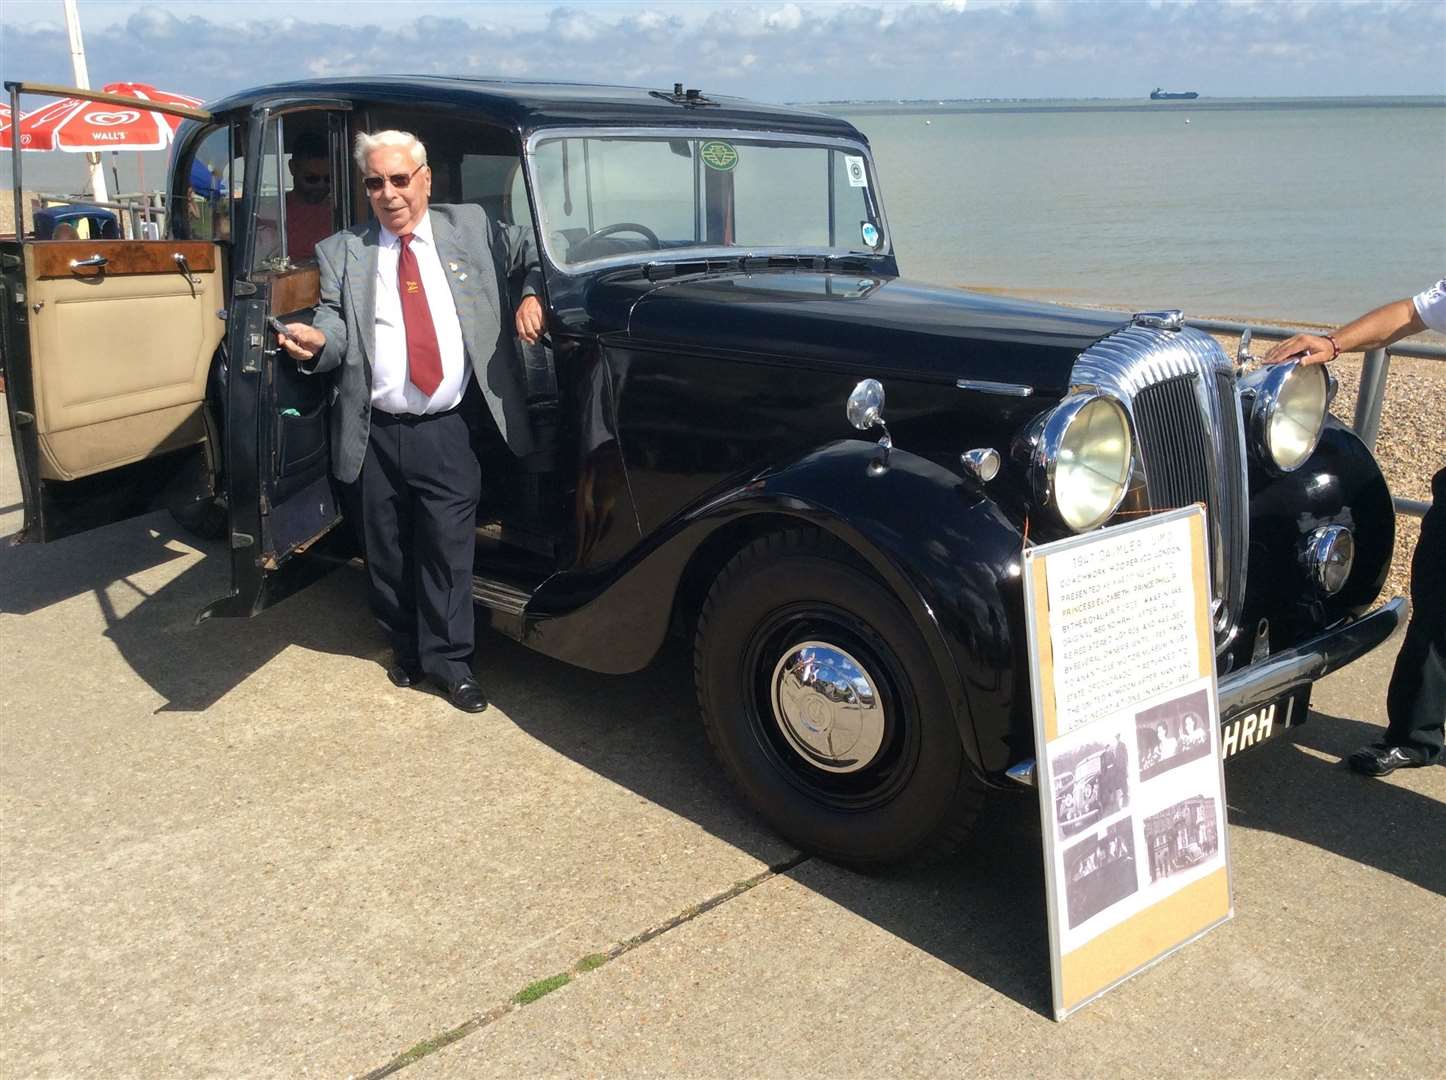 Tom Lambkin on The Leas at Minster with his his 1947 Daimler limousine which was presented to Princess Elizabeth and Prince Philip by the RAF as a wedding present